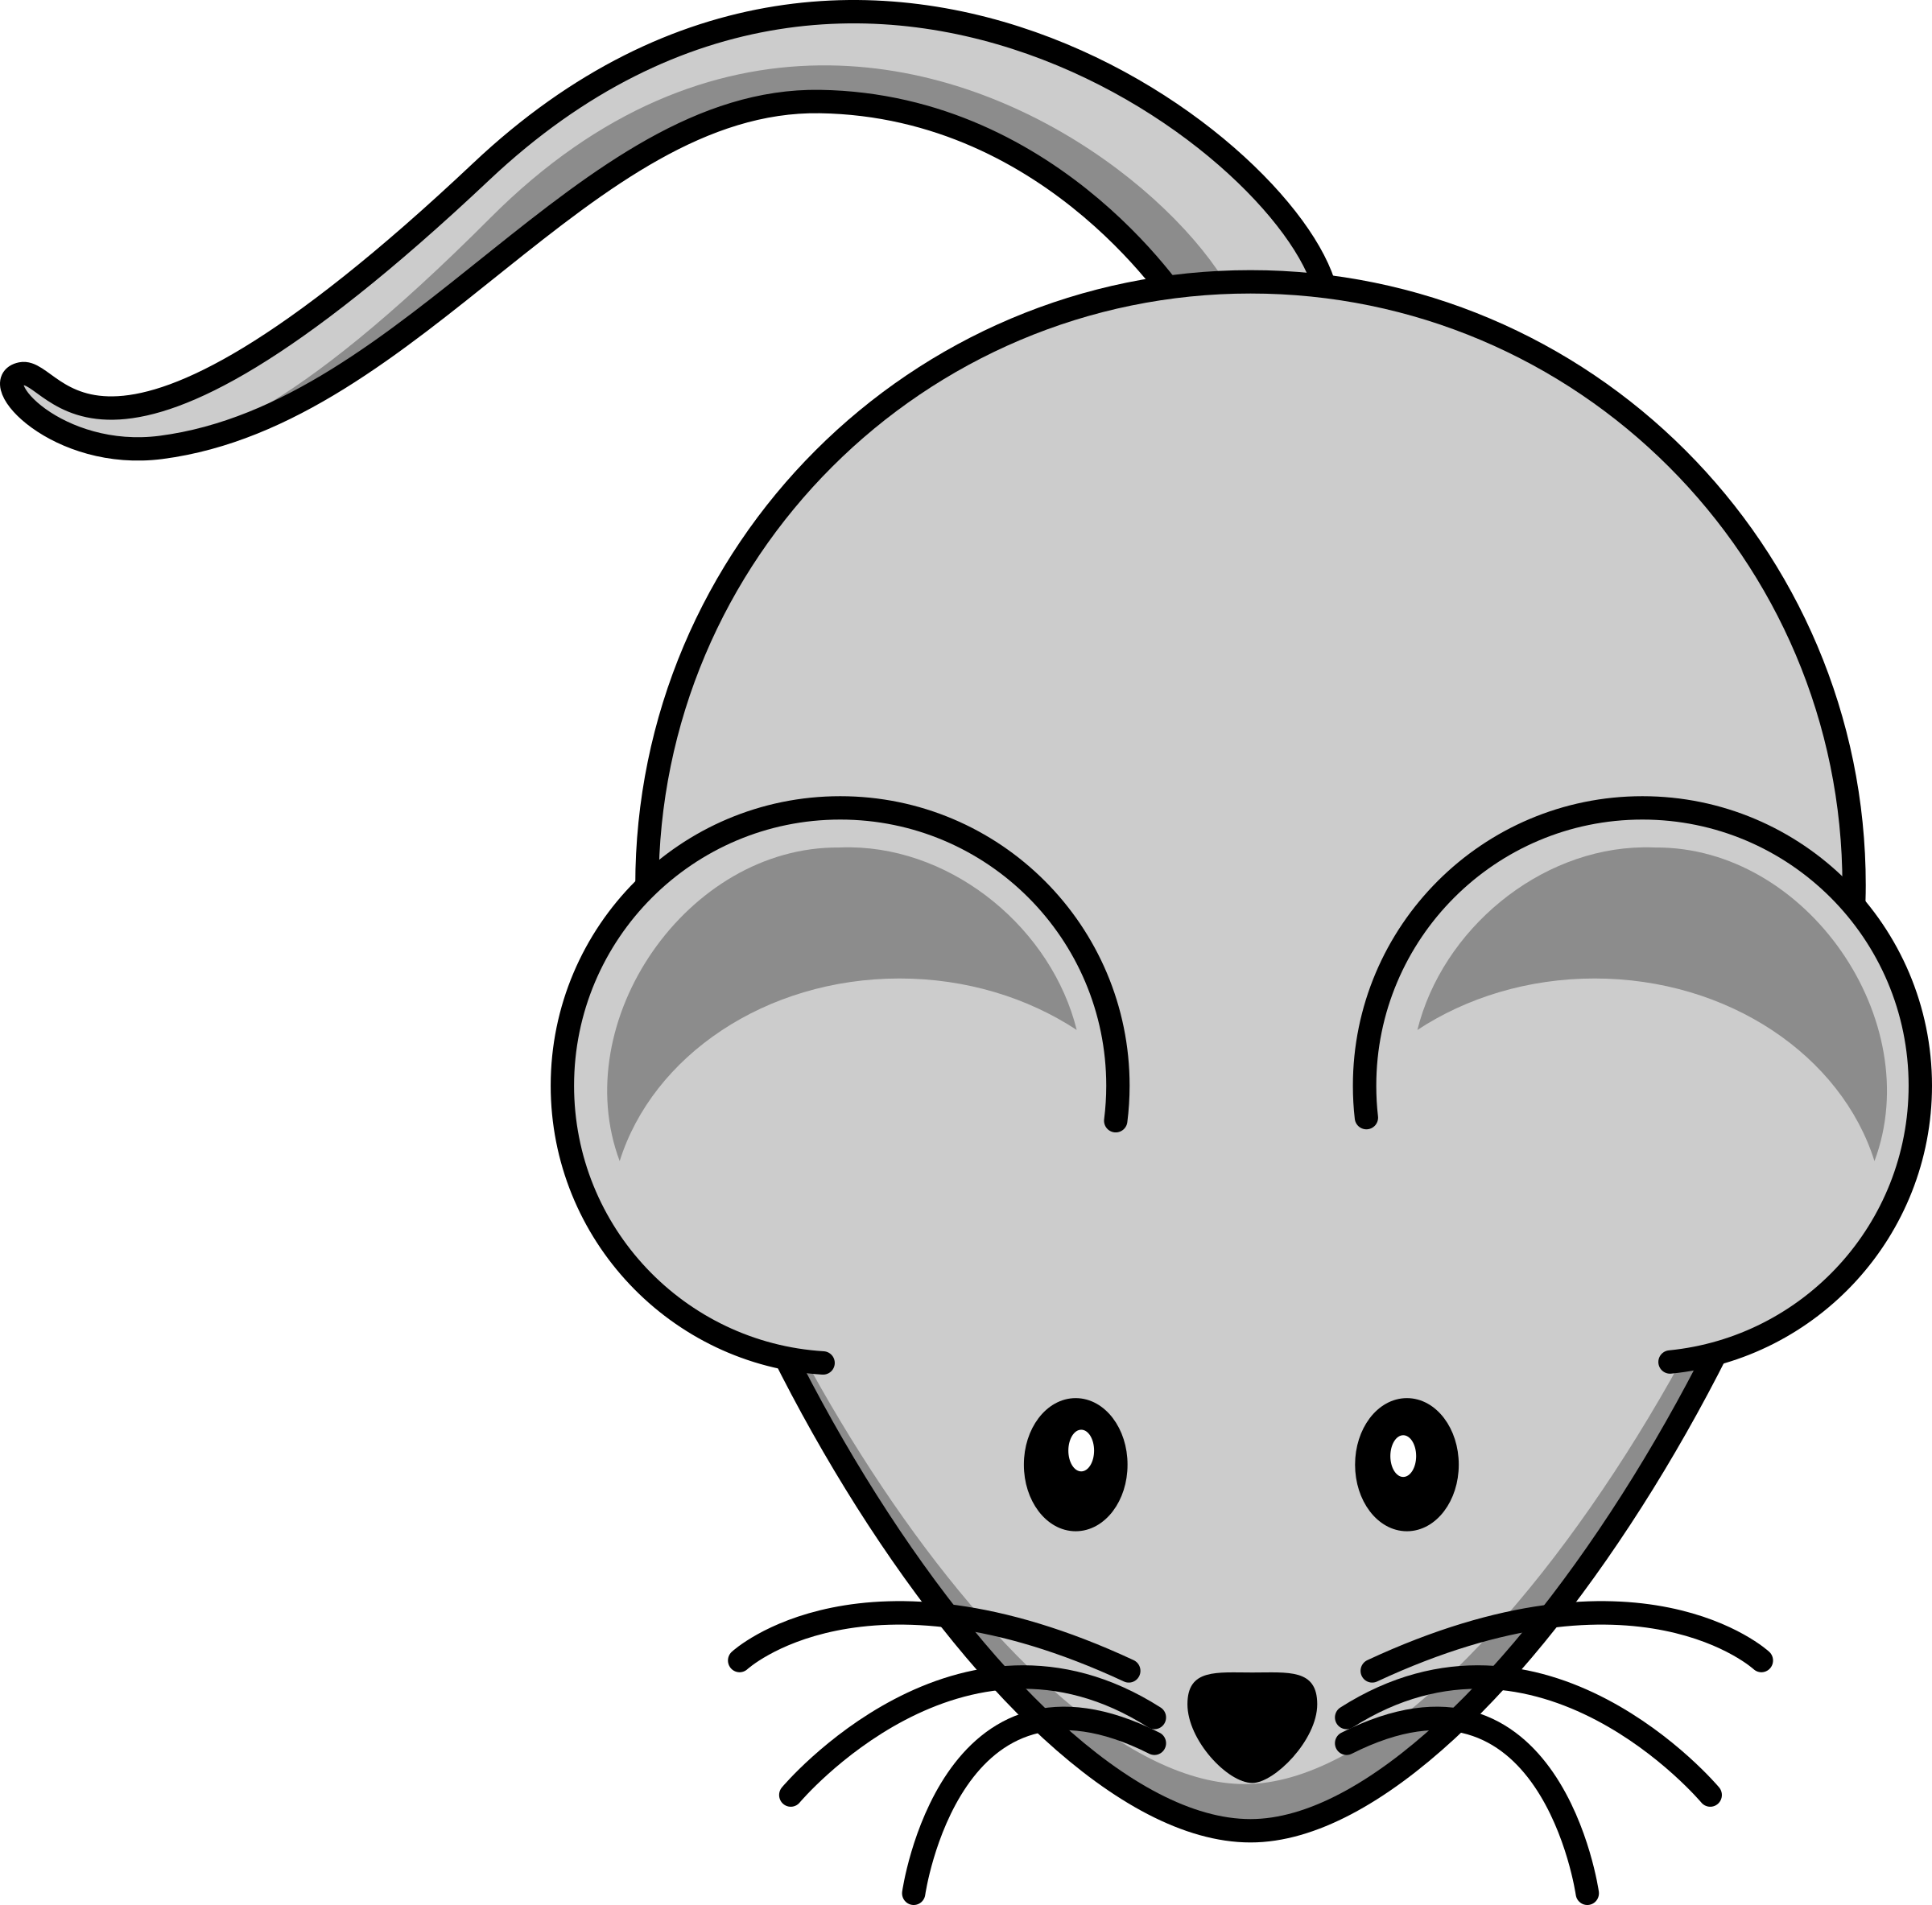 Cartoon mouse image group. Face clipart ant